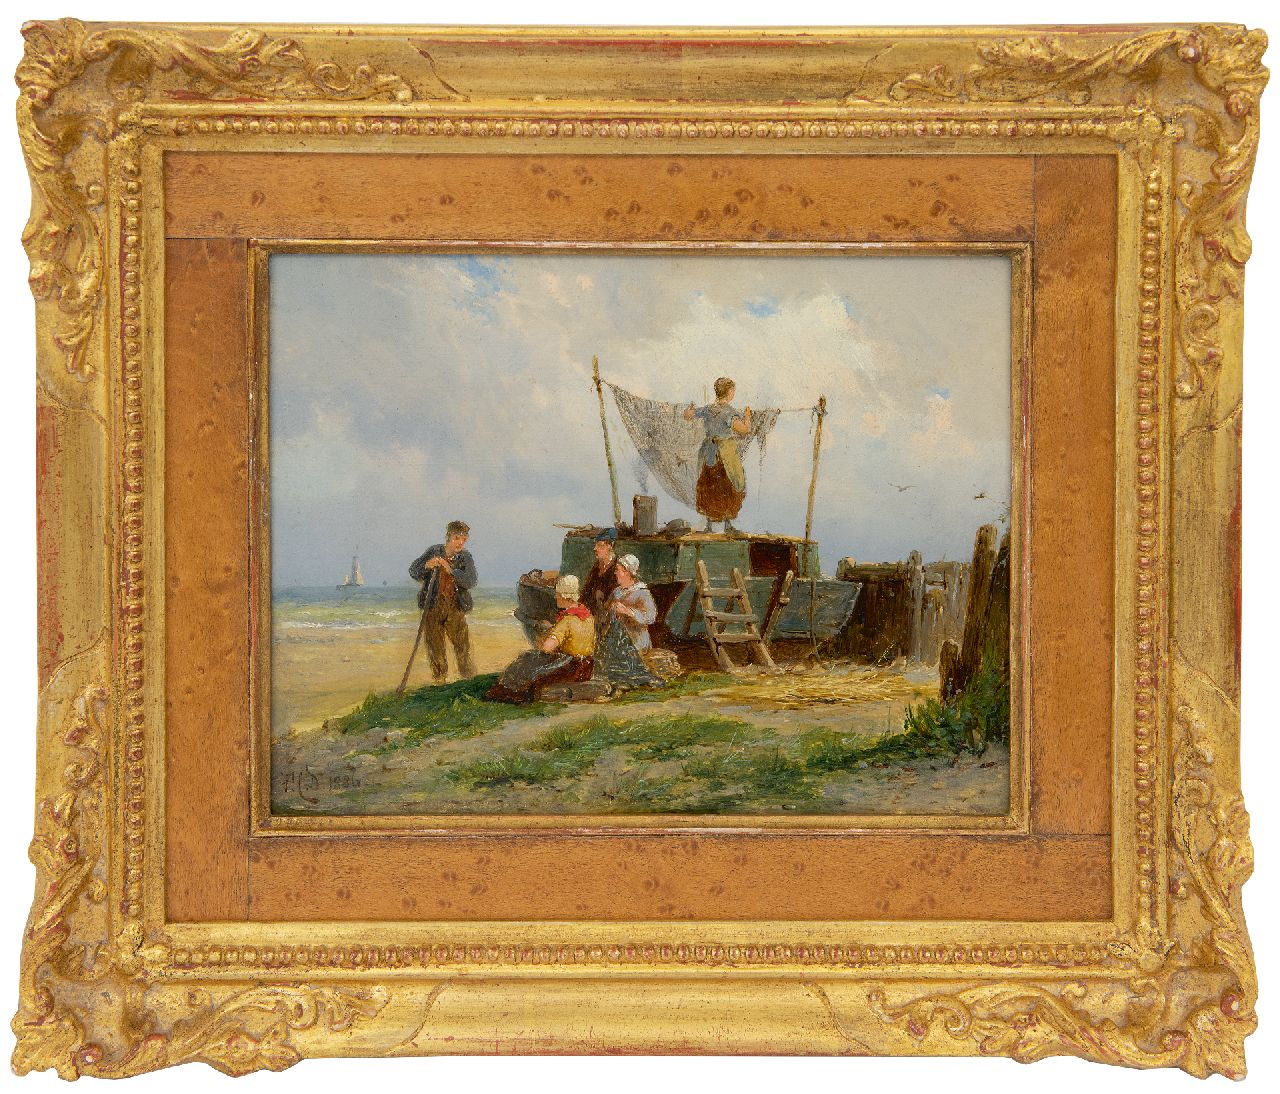 Dommershuijzen P.C.  | Pieter Cornelis Dommershuijzen | Paintings offered for sale | Fisherfolk drying the nest, oil on panel 15.0 x 20.2 cm, signed l.l. with initials and dated 1886